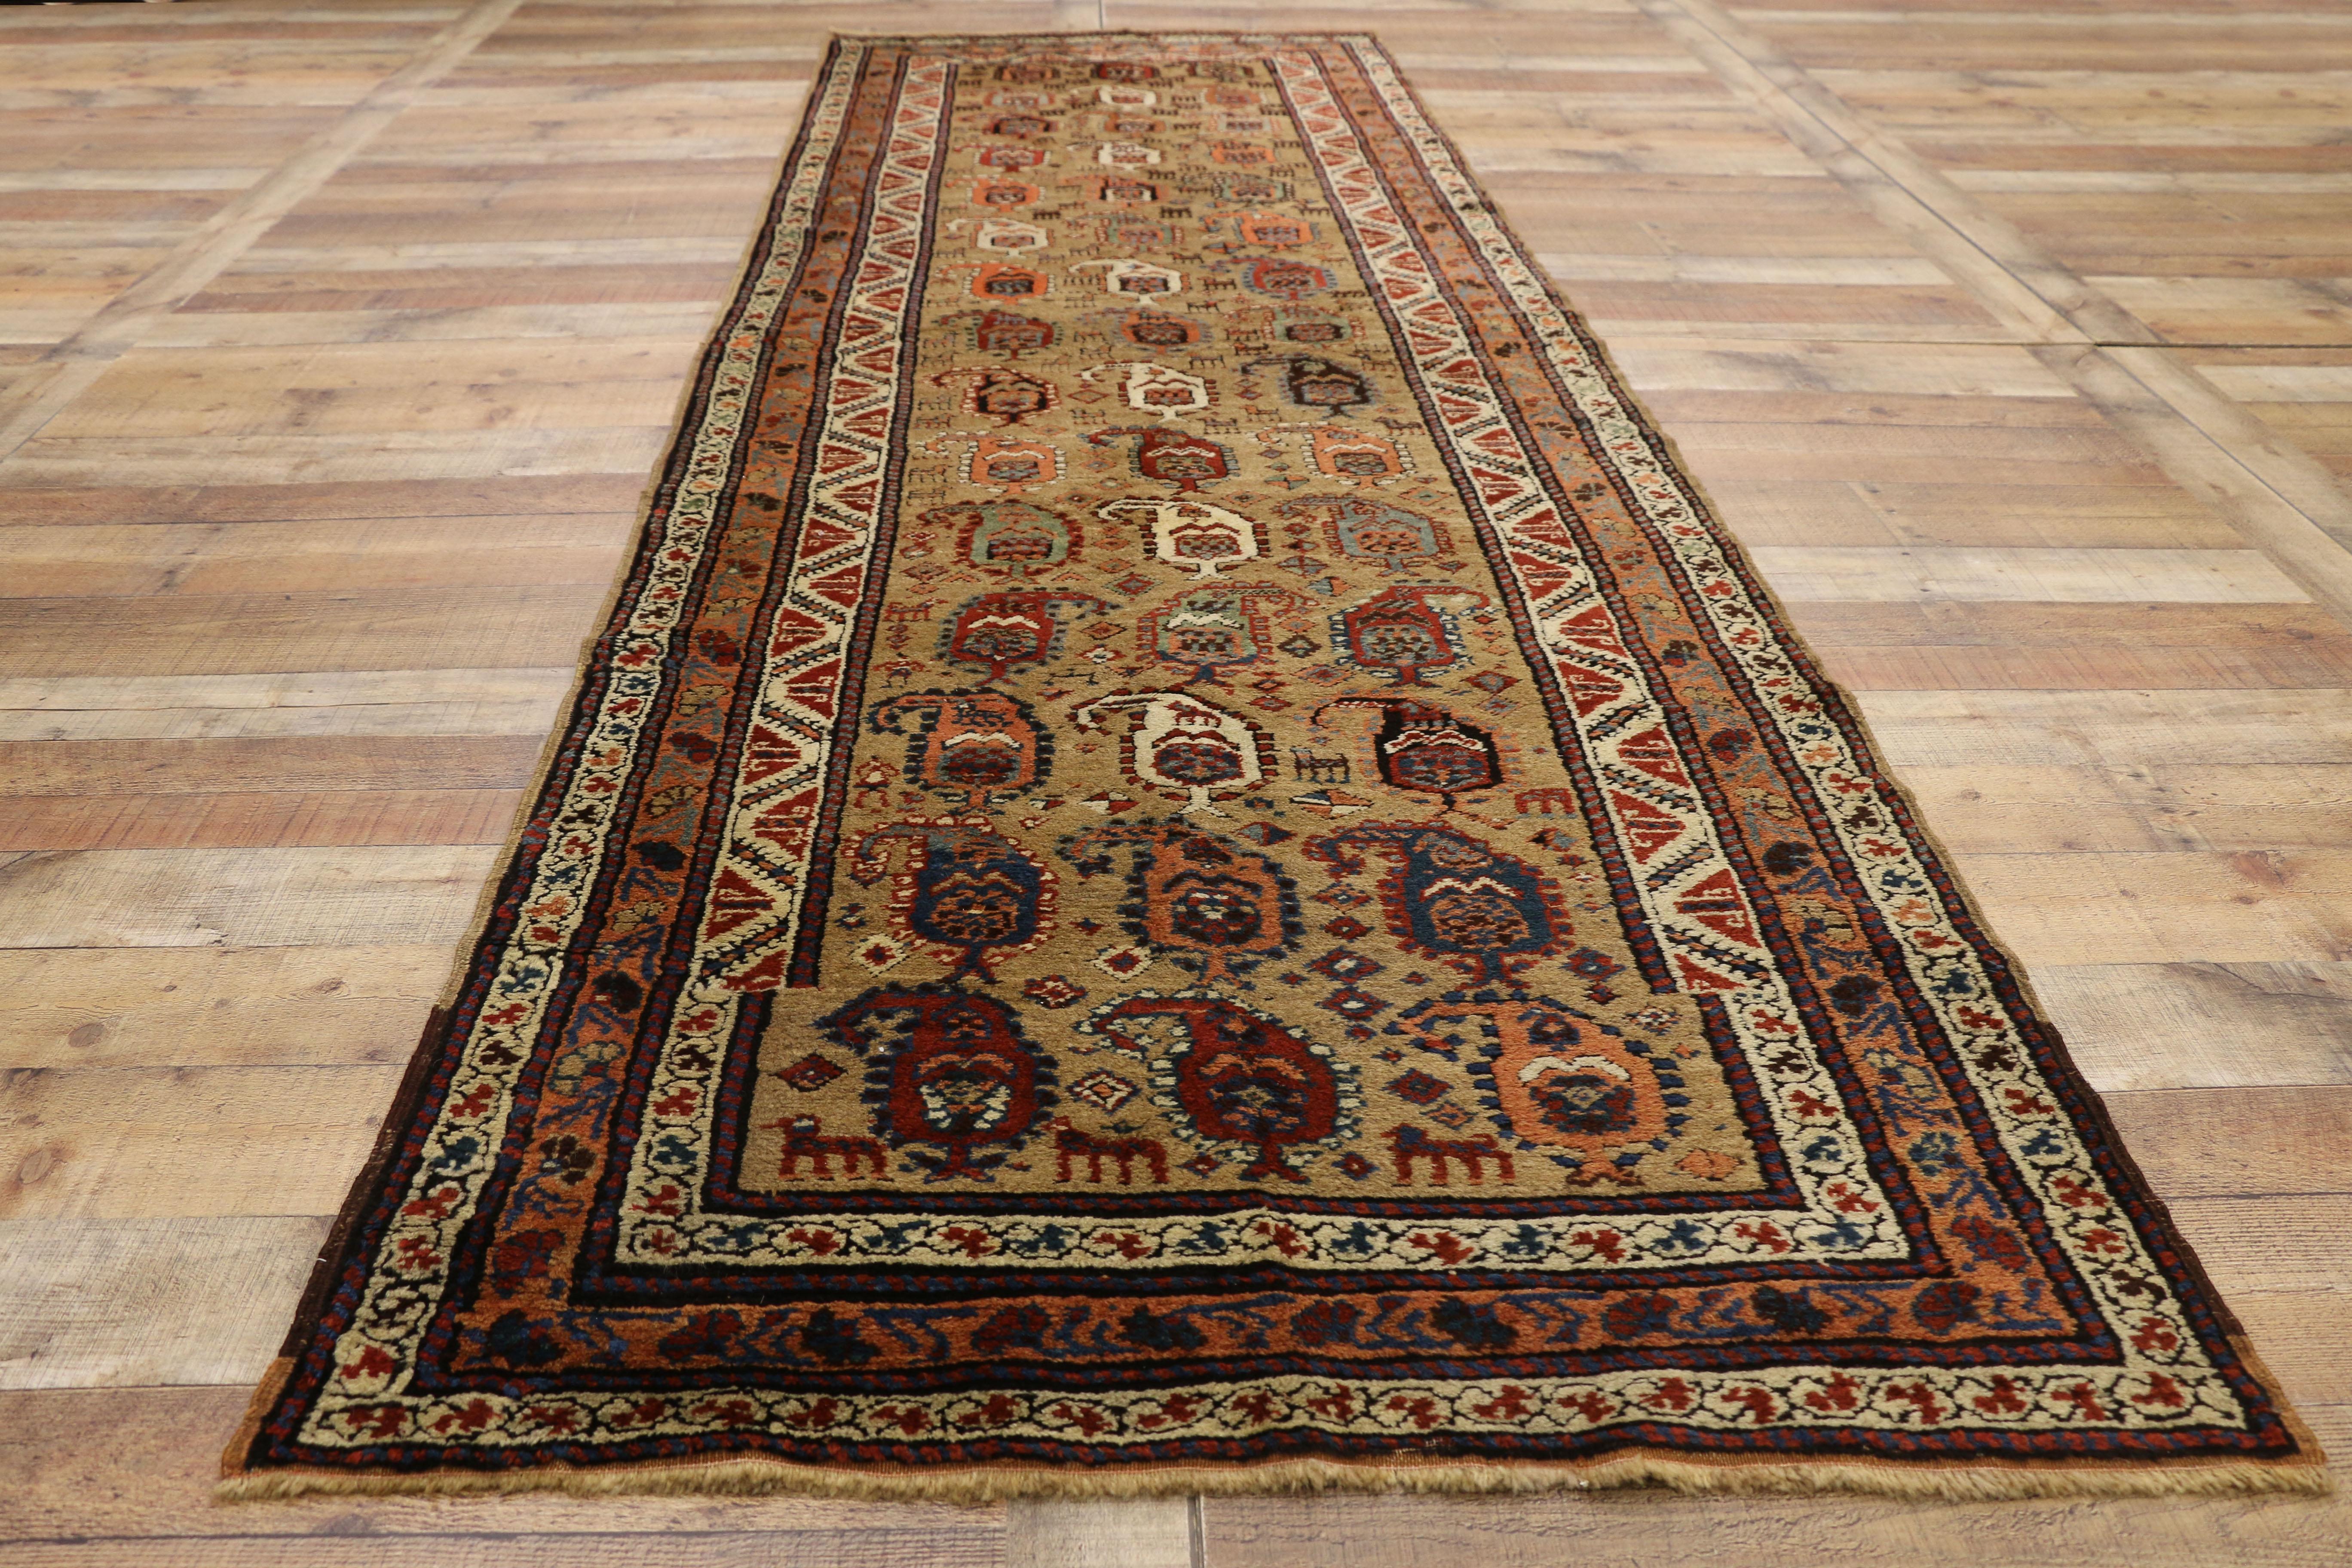 Antique Persian Kurdish Hallway Runner with Nomadic Mid-Century Modern Style In Good Condition For Sale In Dallas, TX